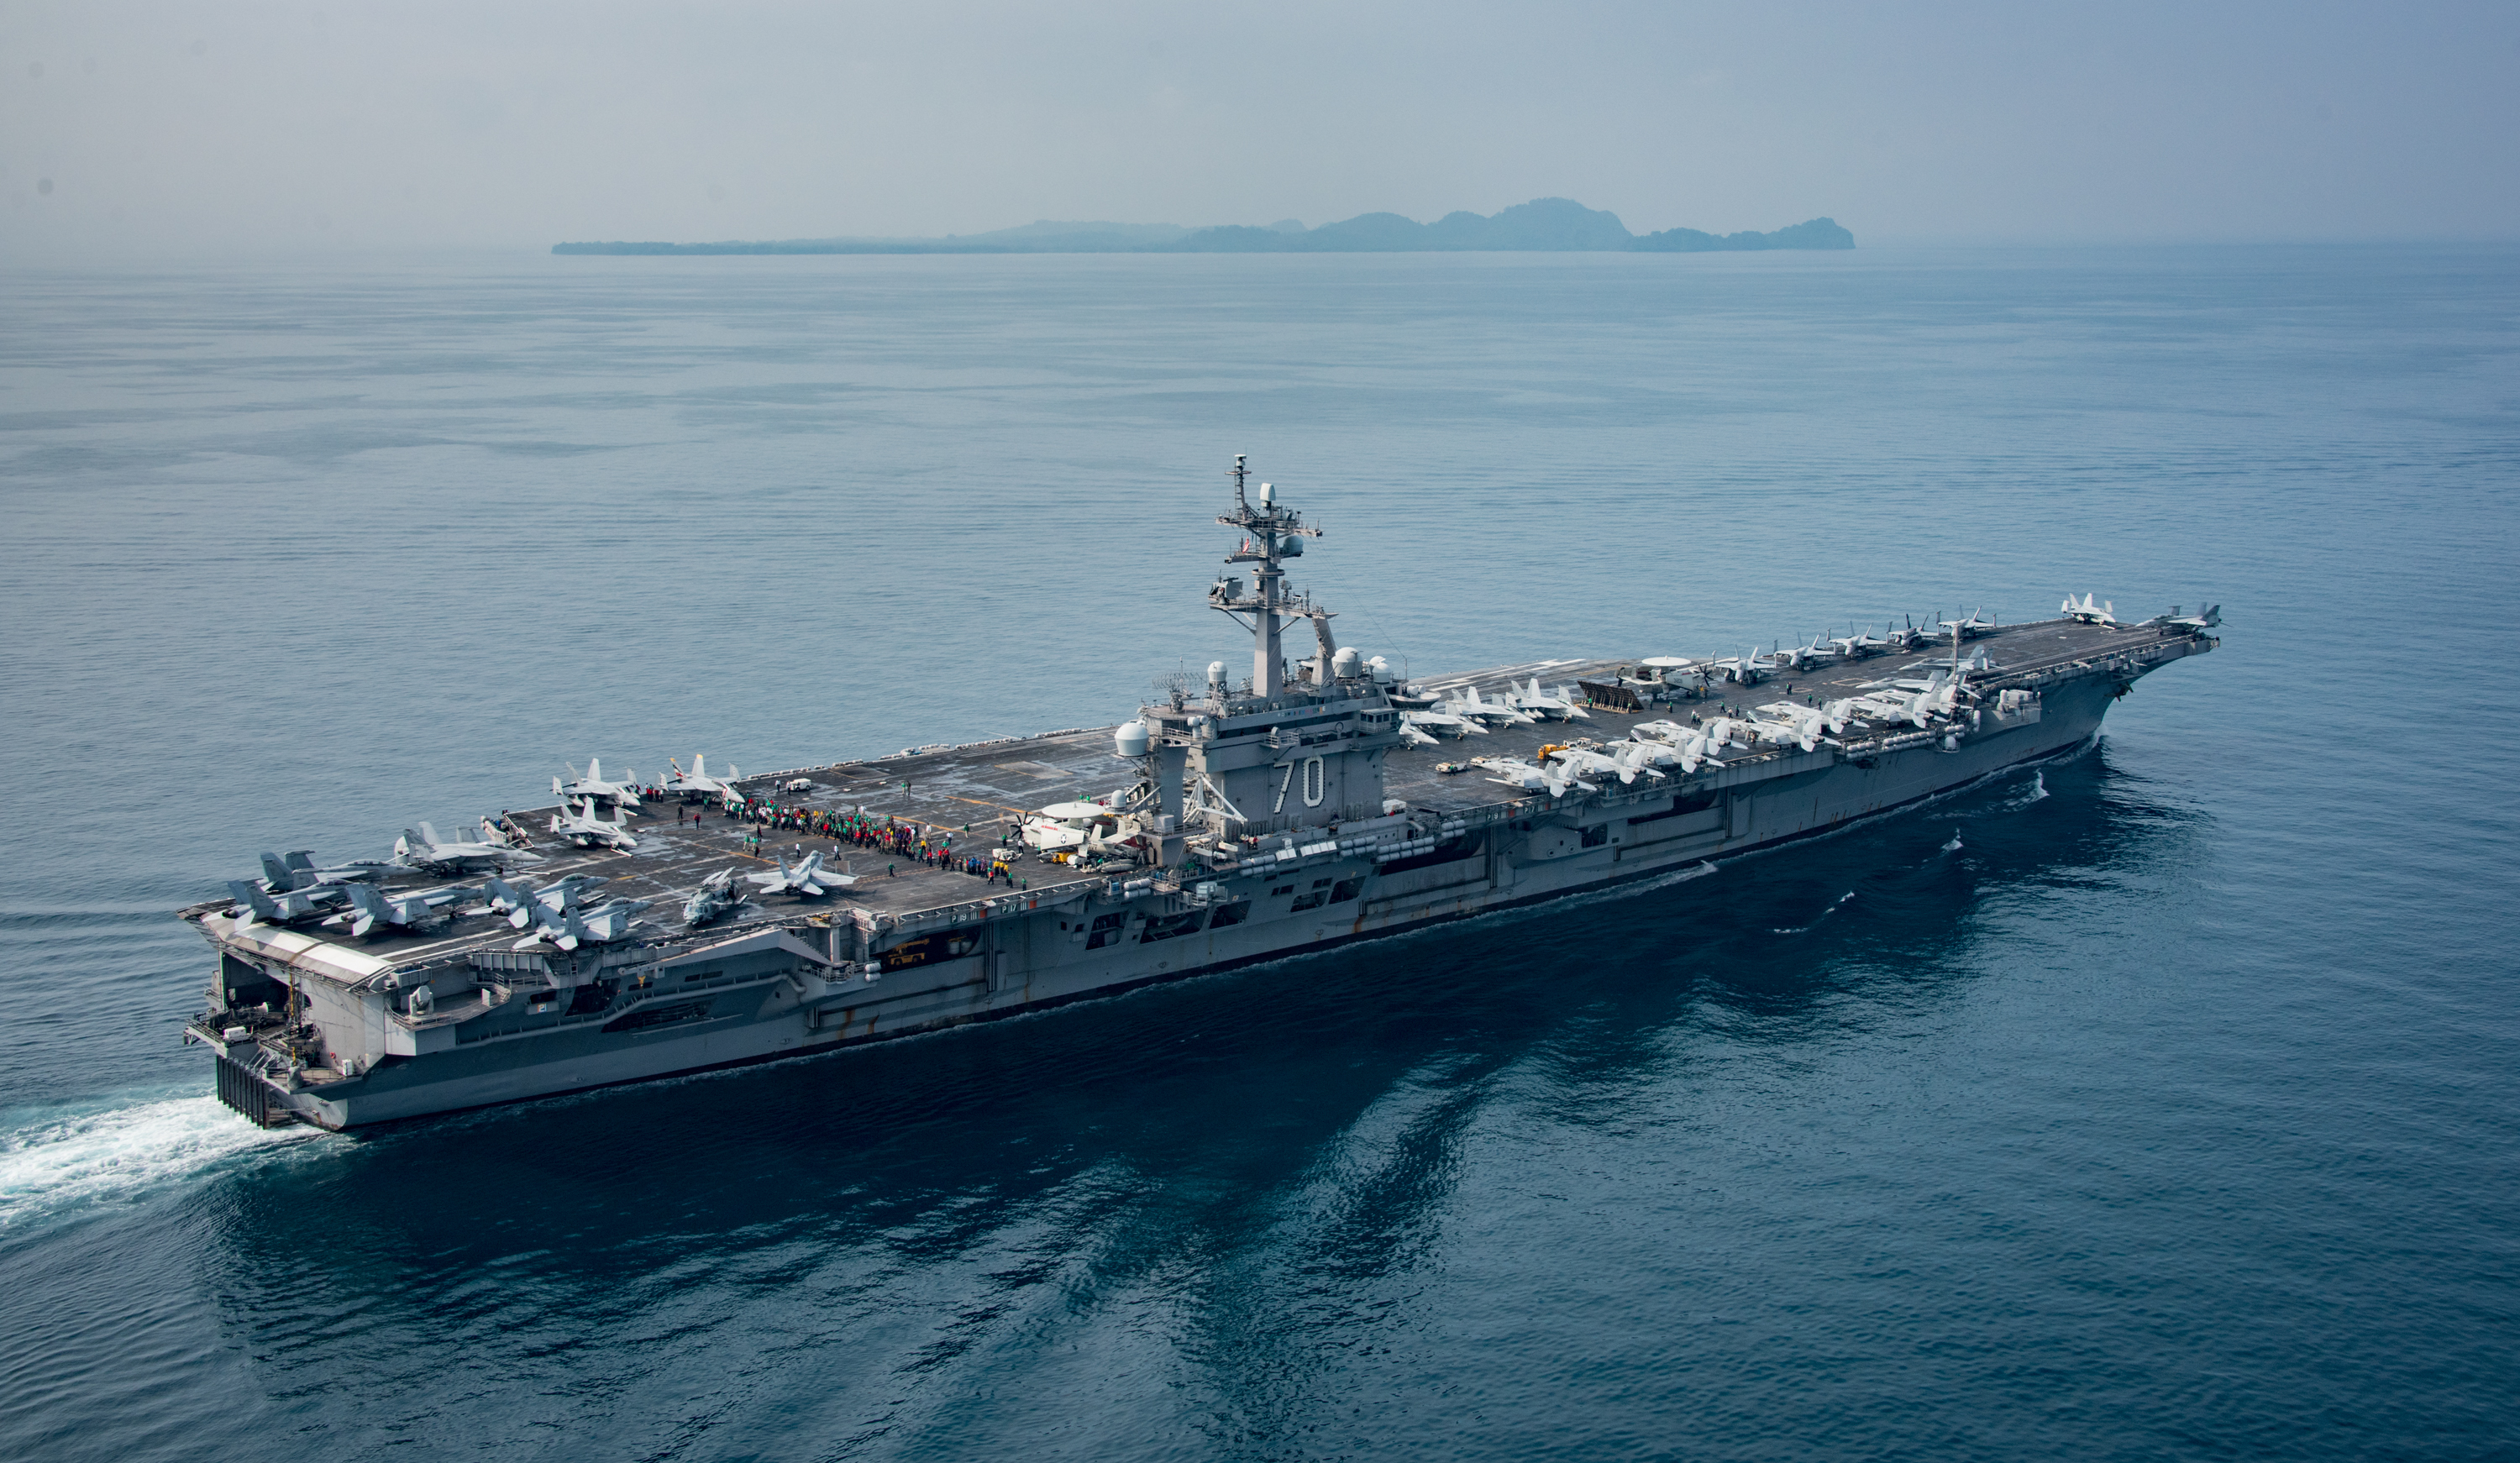 In this handout provided by the U.S. Navy, the aircraft carrier USS Carl Vinson transits the Sunda Strait on April 14, 2017 in Indonesia. (ass Communication Specialist 2nd Class Sean M. Castellano —U.S. Navy/Getty Images)